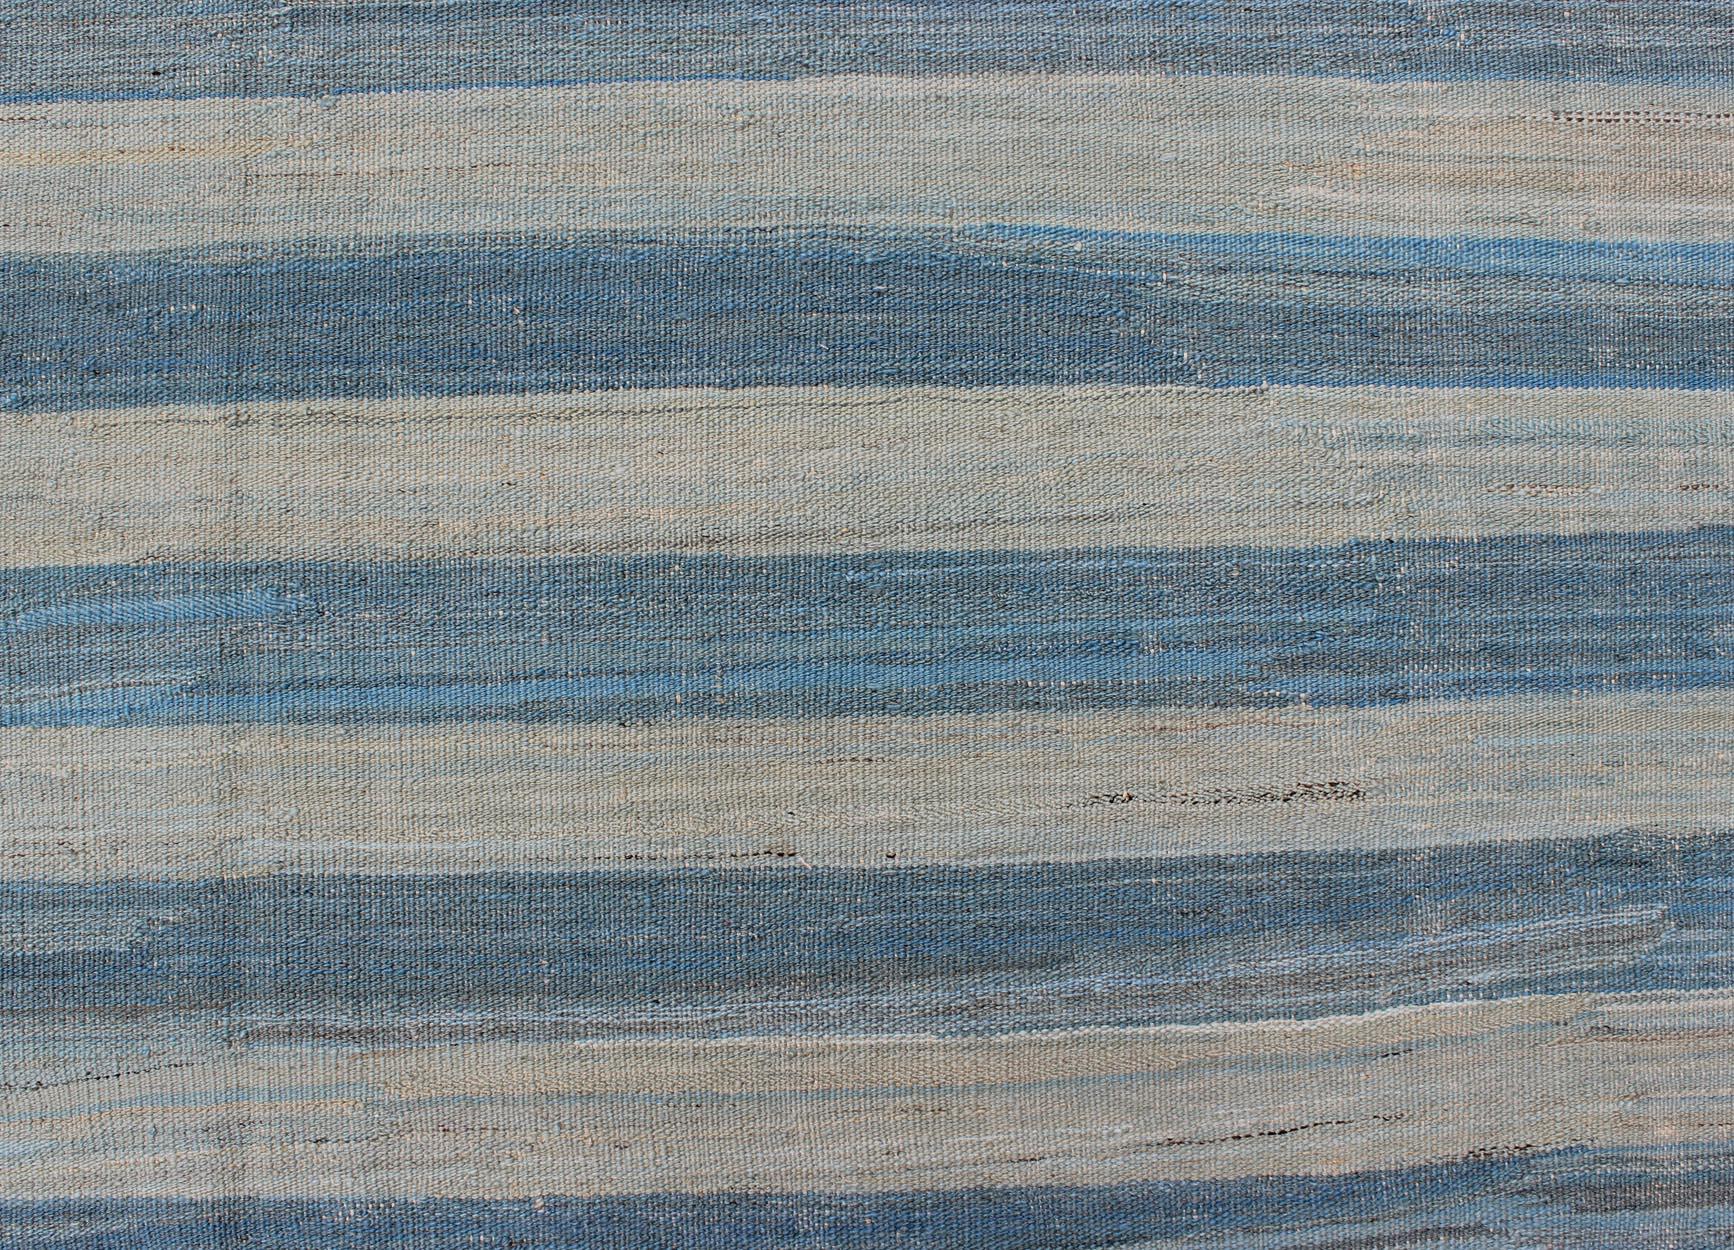 Wool Flat-Weave Modern Kilim Rug with Stripes in Shades of Blue, Taupe Gray and Ivory